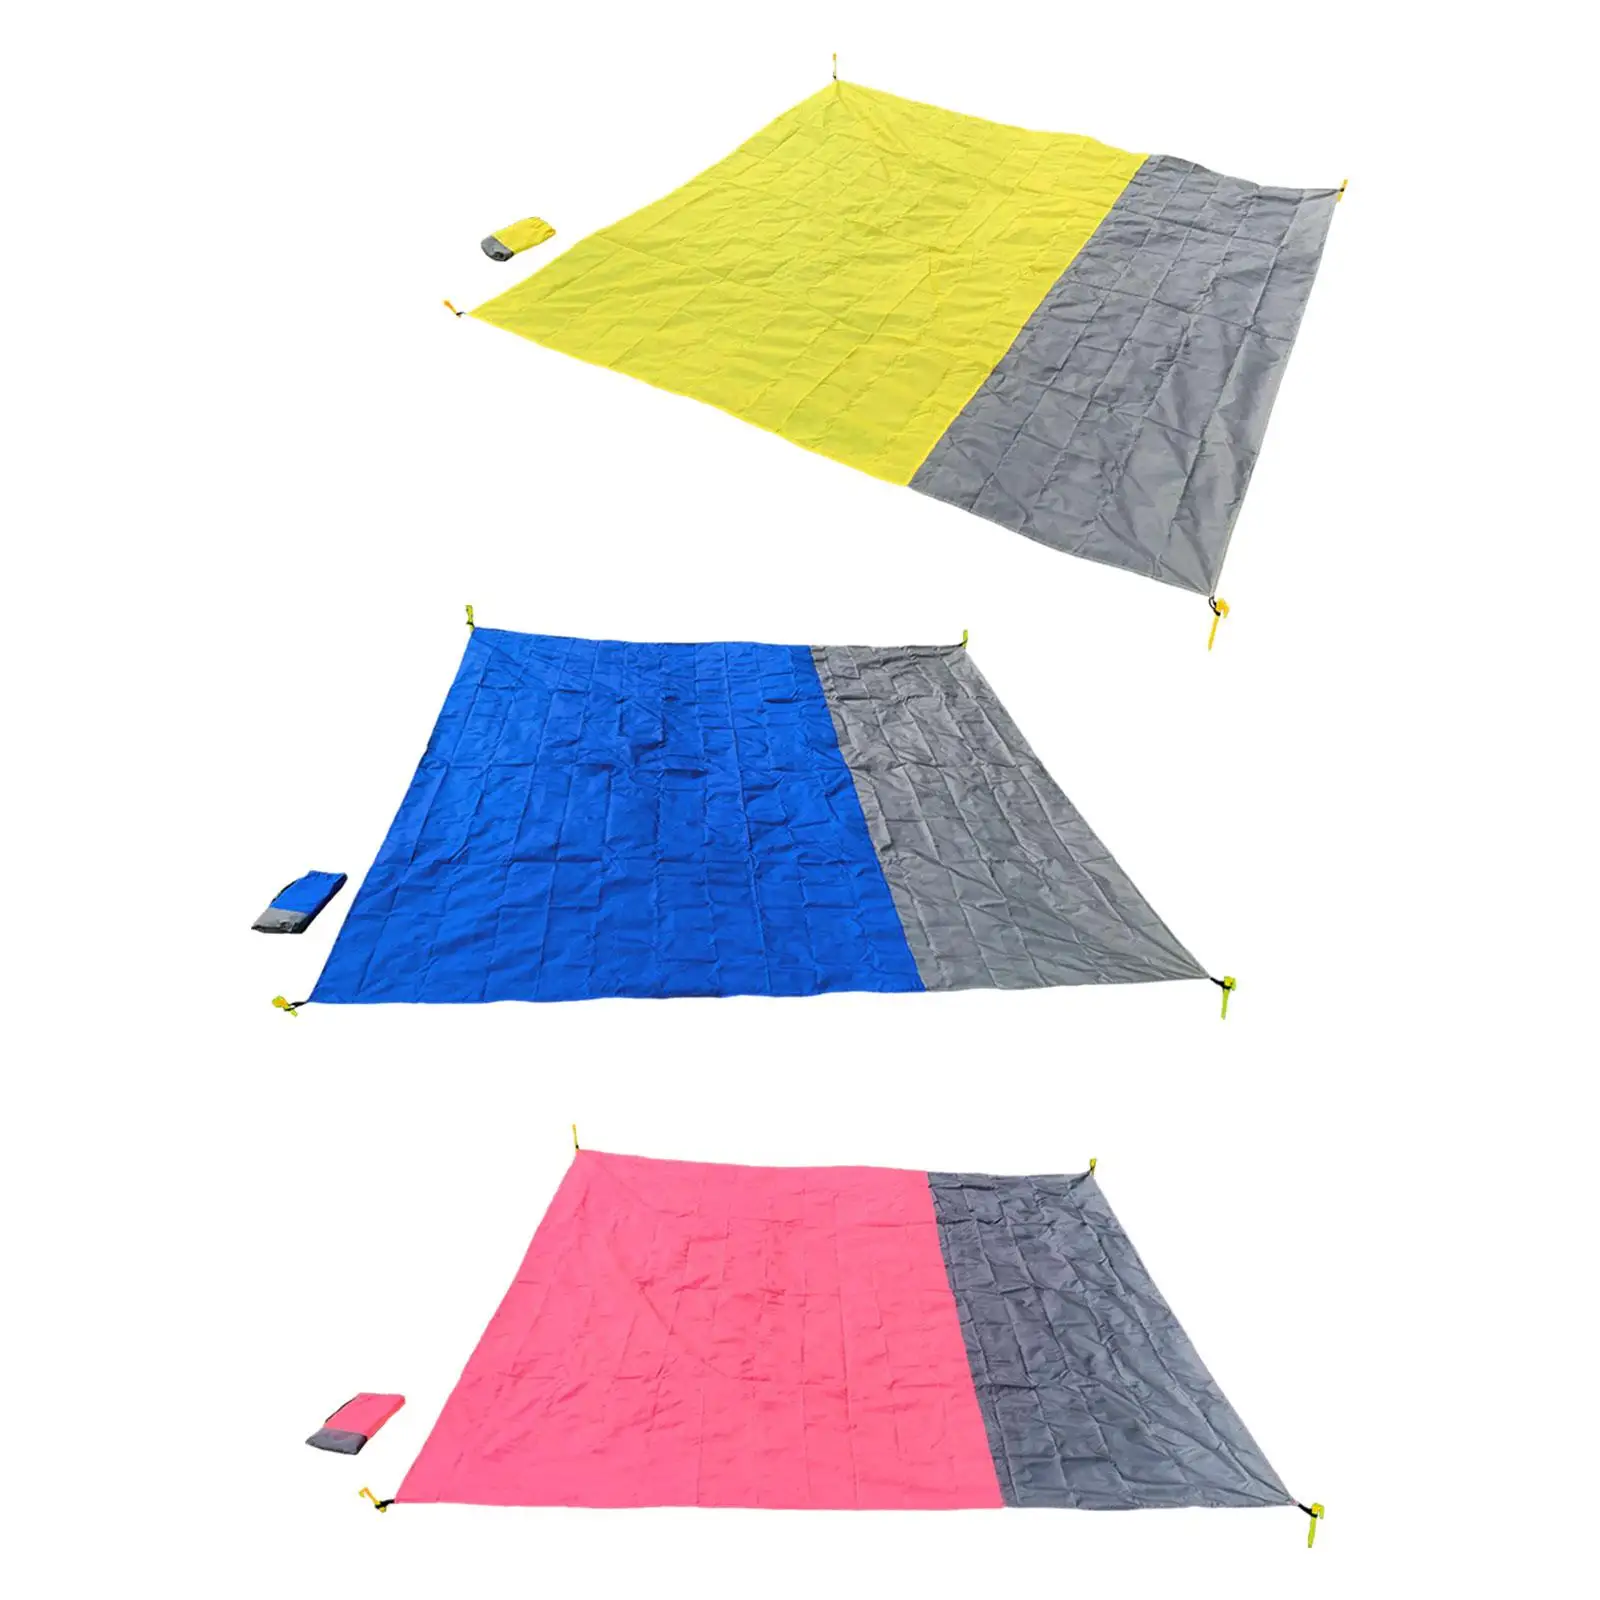 Picnic Blanket Foldable Waterproof Lightweight Beach Blanket Accessories for Backpacking Playground Hiking Festival Camping